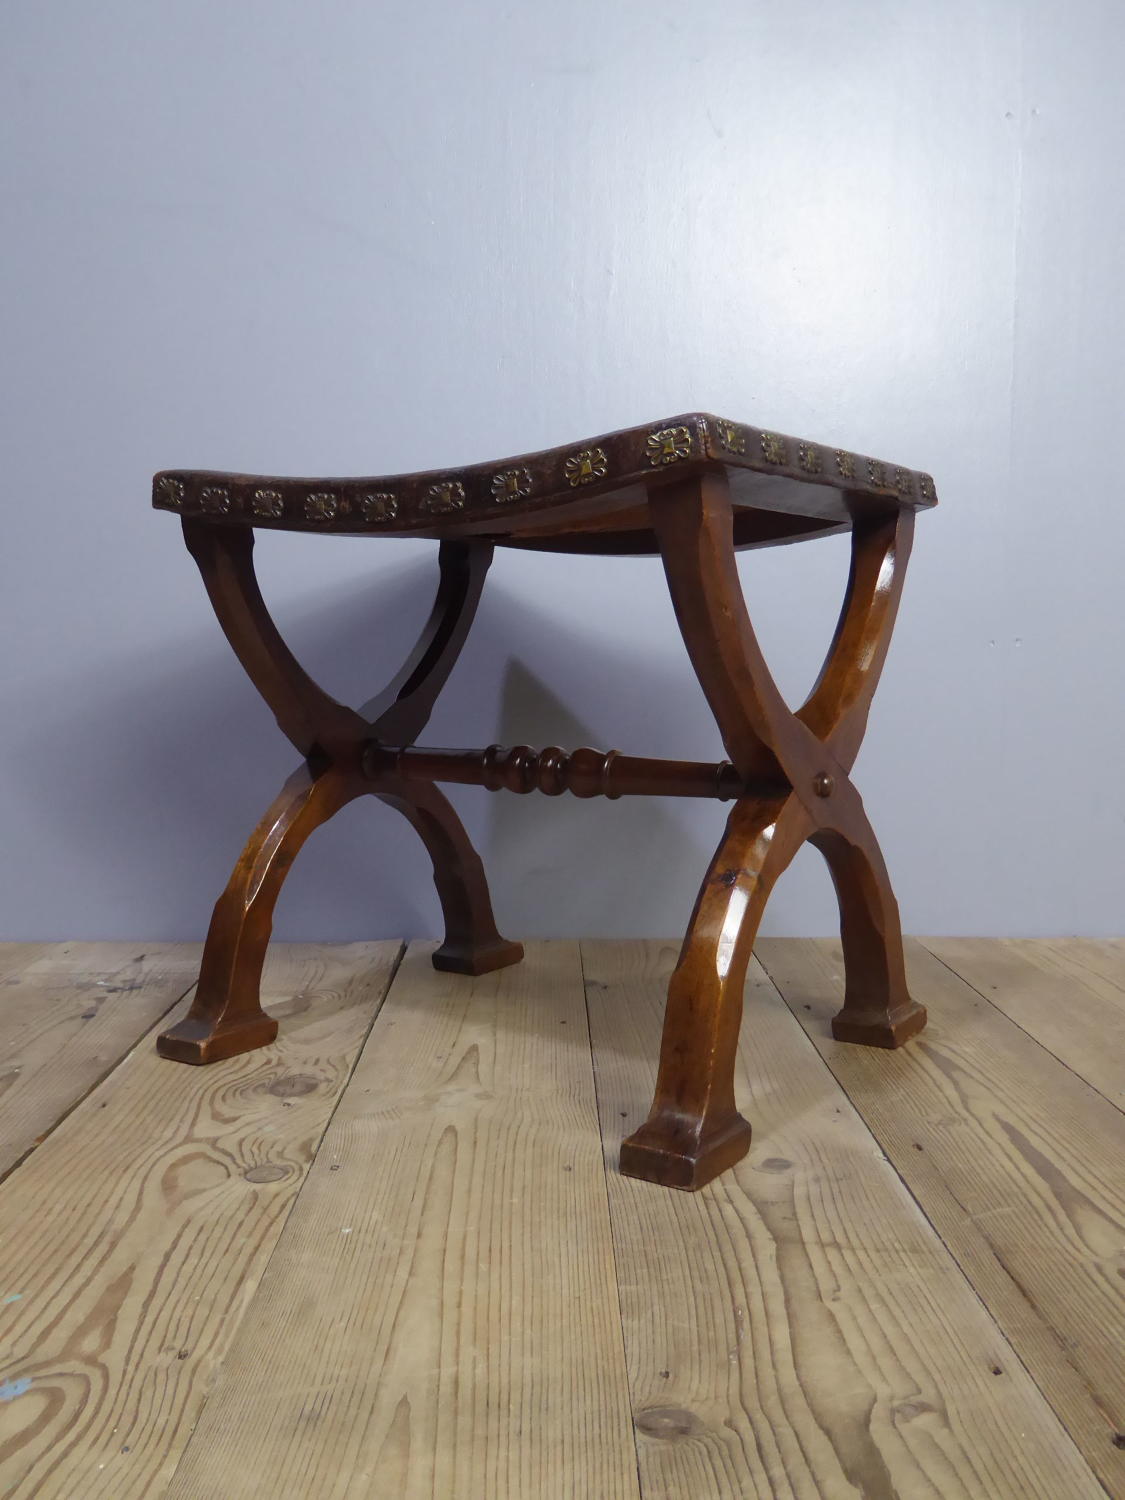 Gothic Revival Stool